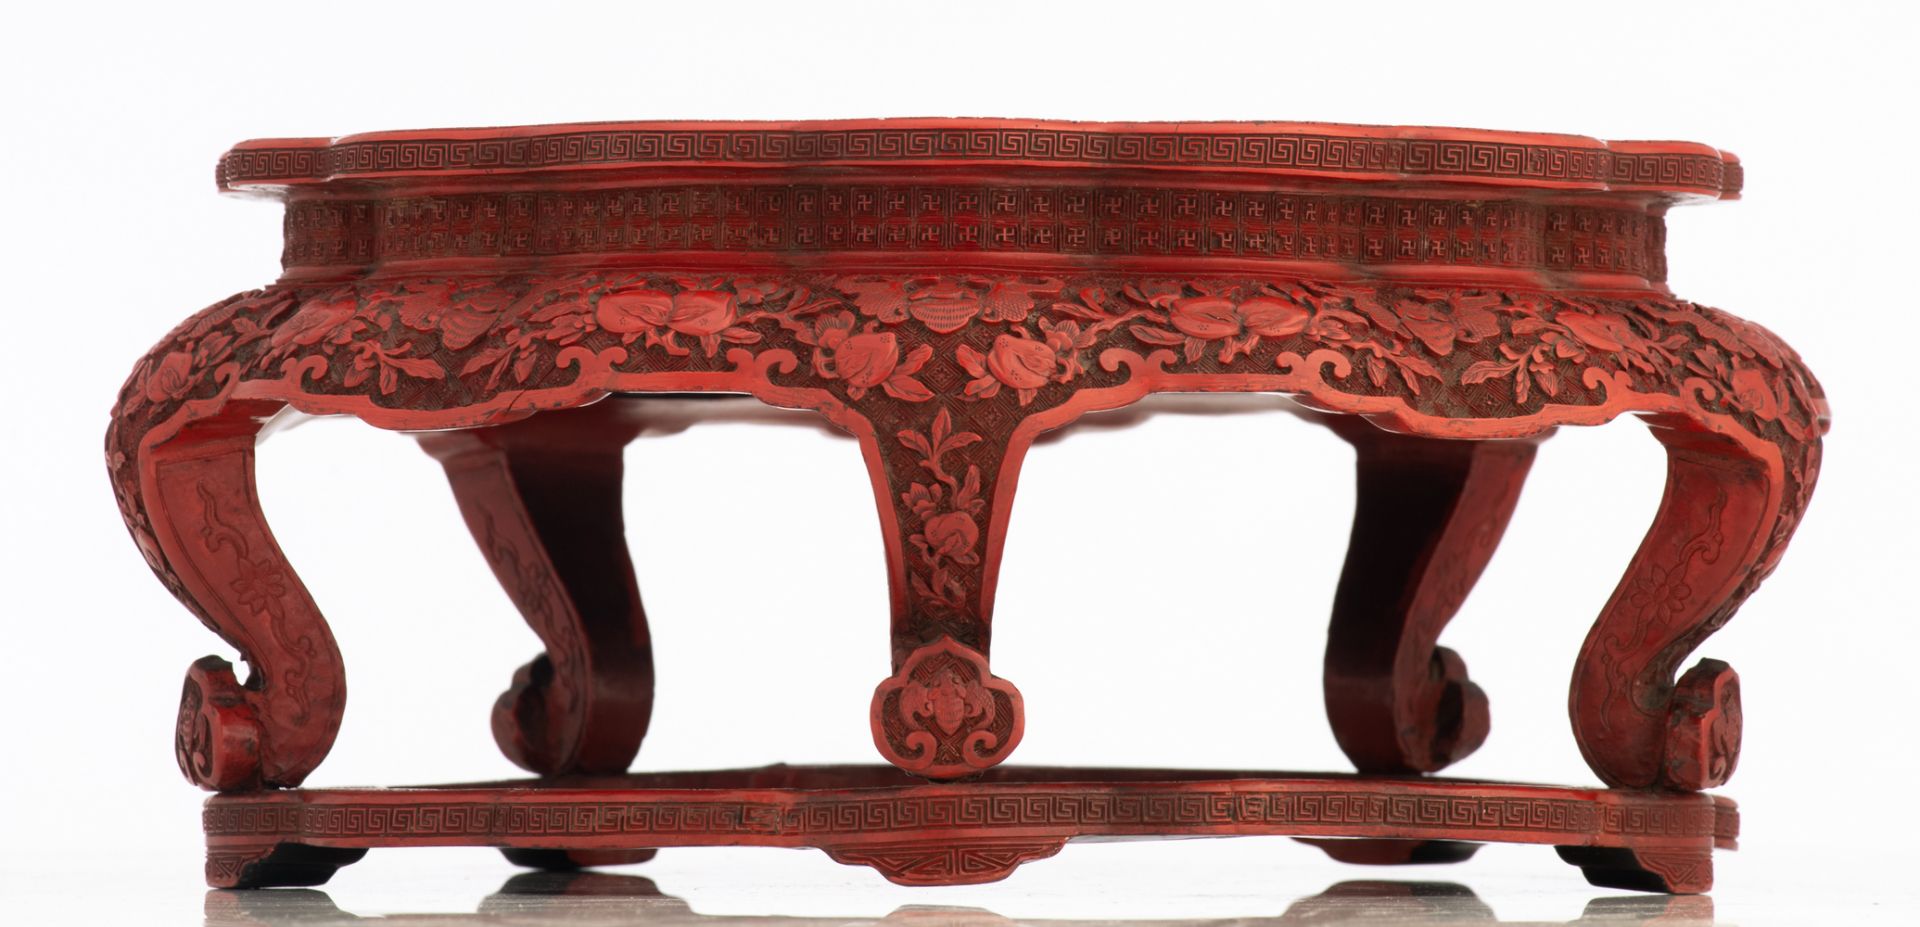 A Chinese red cinnabar lacquered stand with lobed top, the legs ruyi shaped, 18th / 19thC, - Image 5 of 7